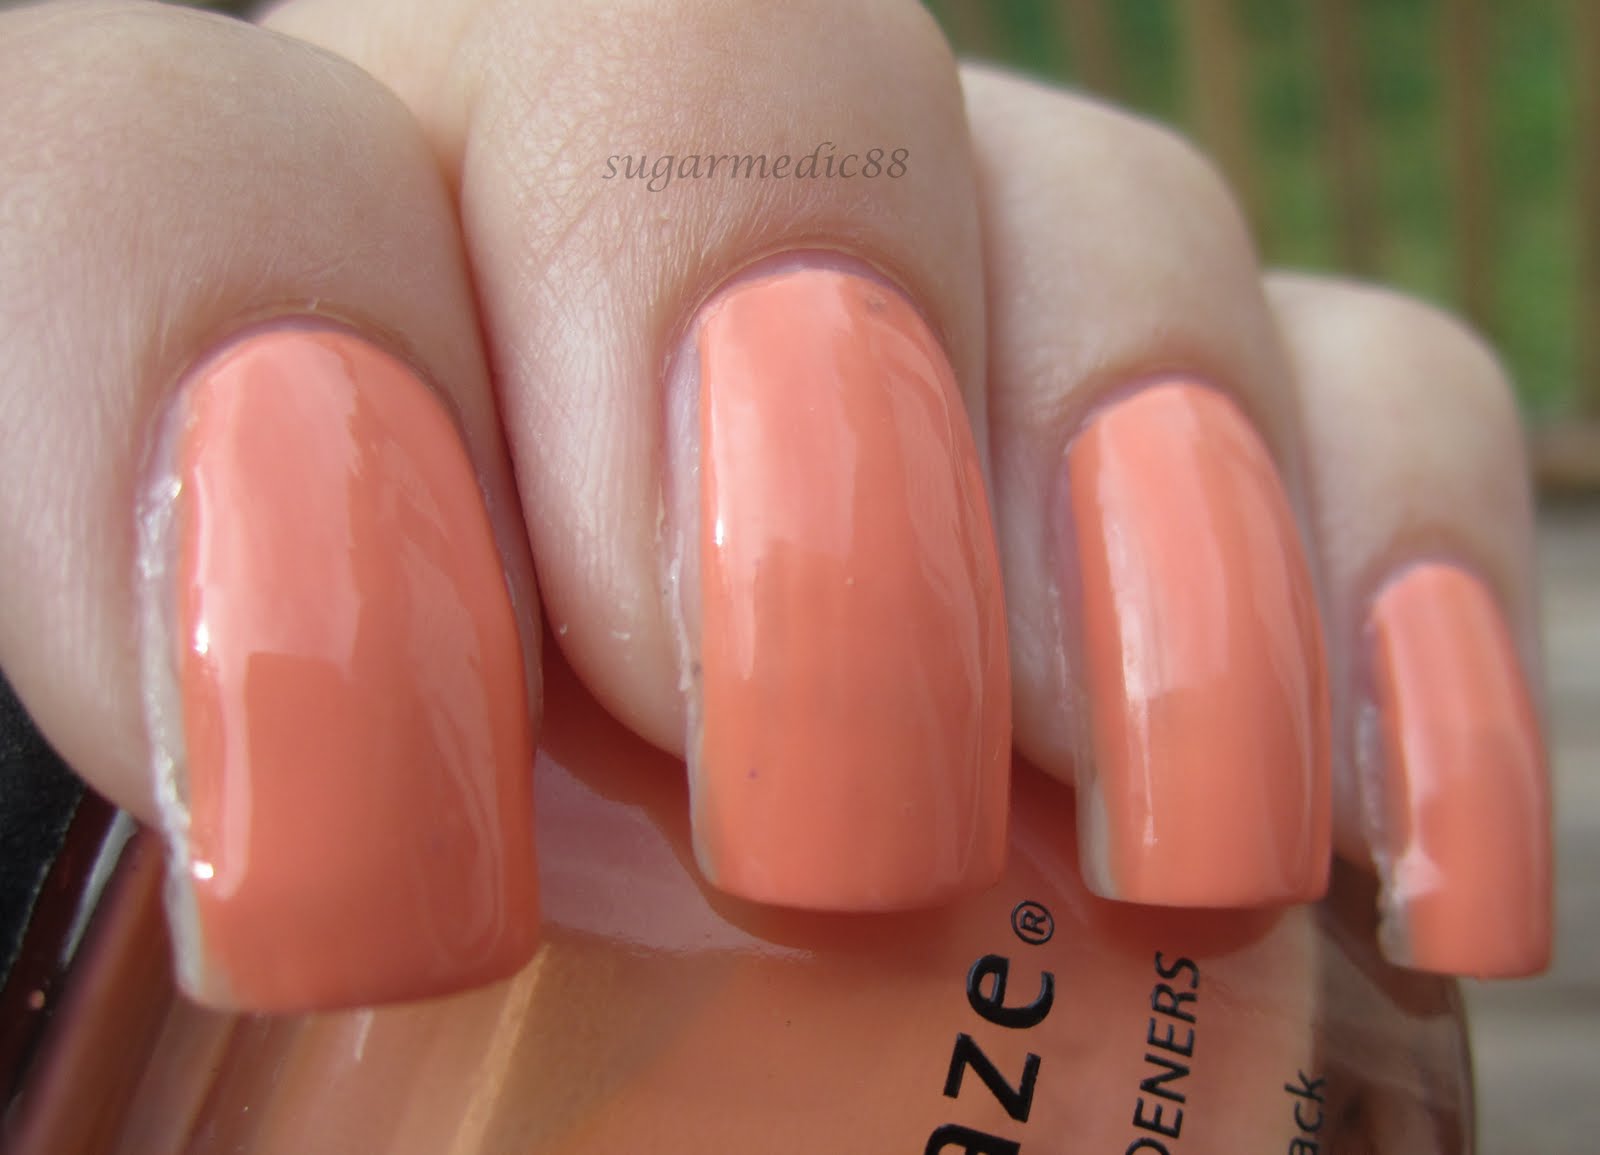 4. China Glaze Nail Lacquer in "Peachy Keen" - wide 2